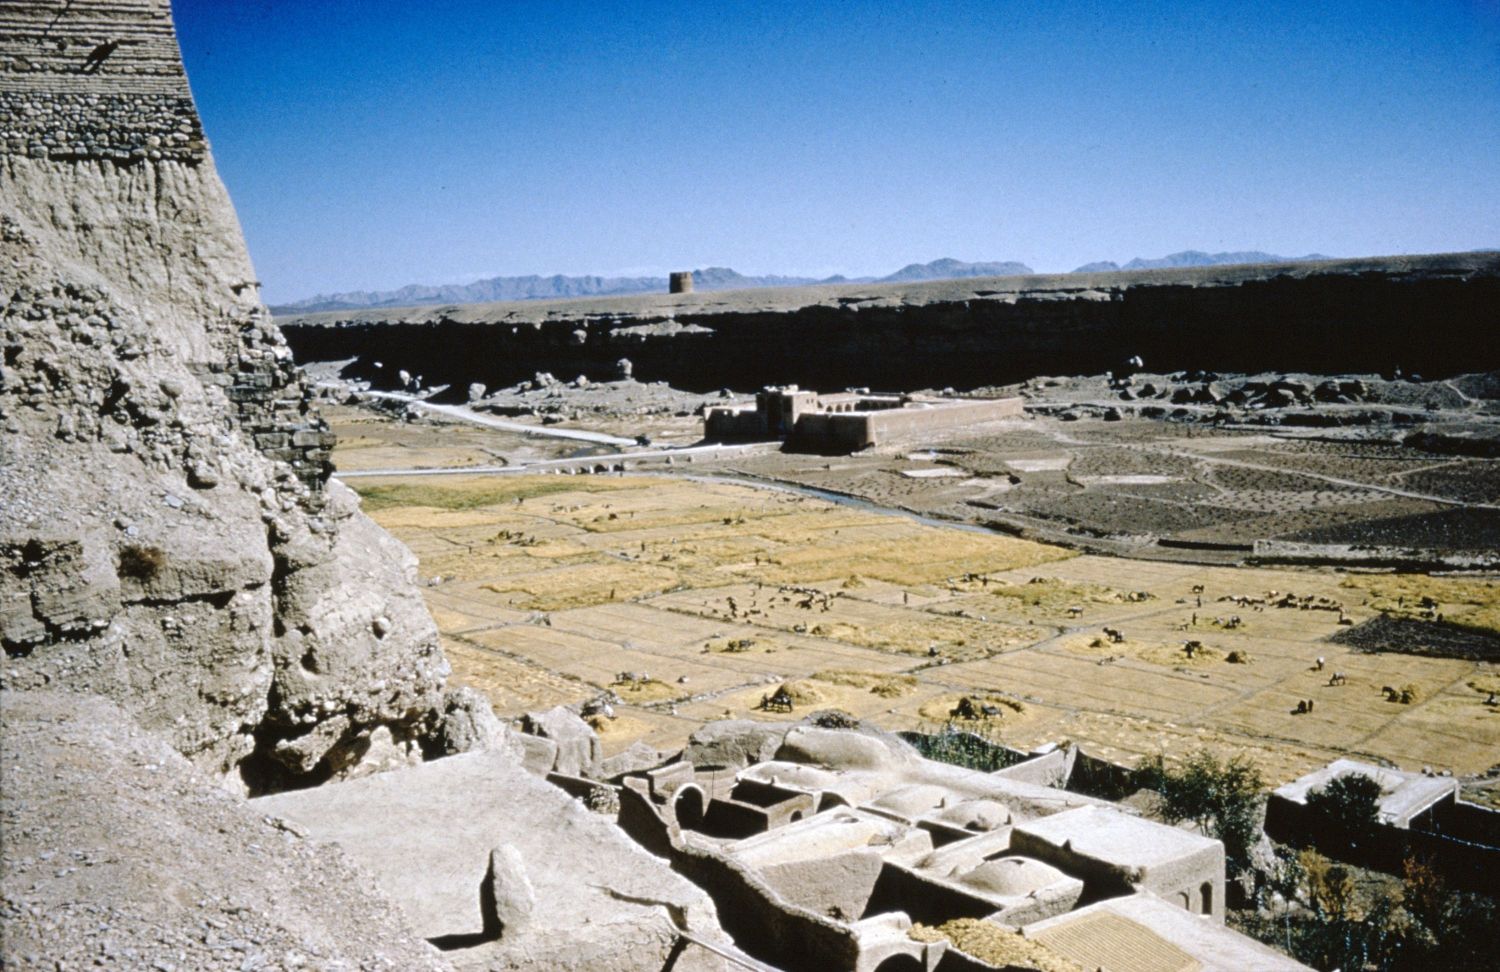 View from citadel facing over river valley. The Caravanserai of Izad Khast is visible in background.